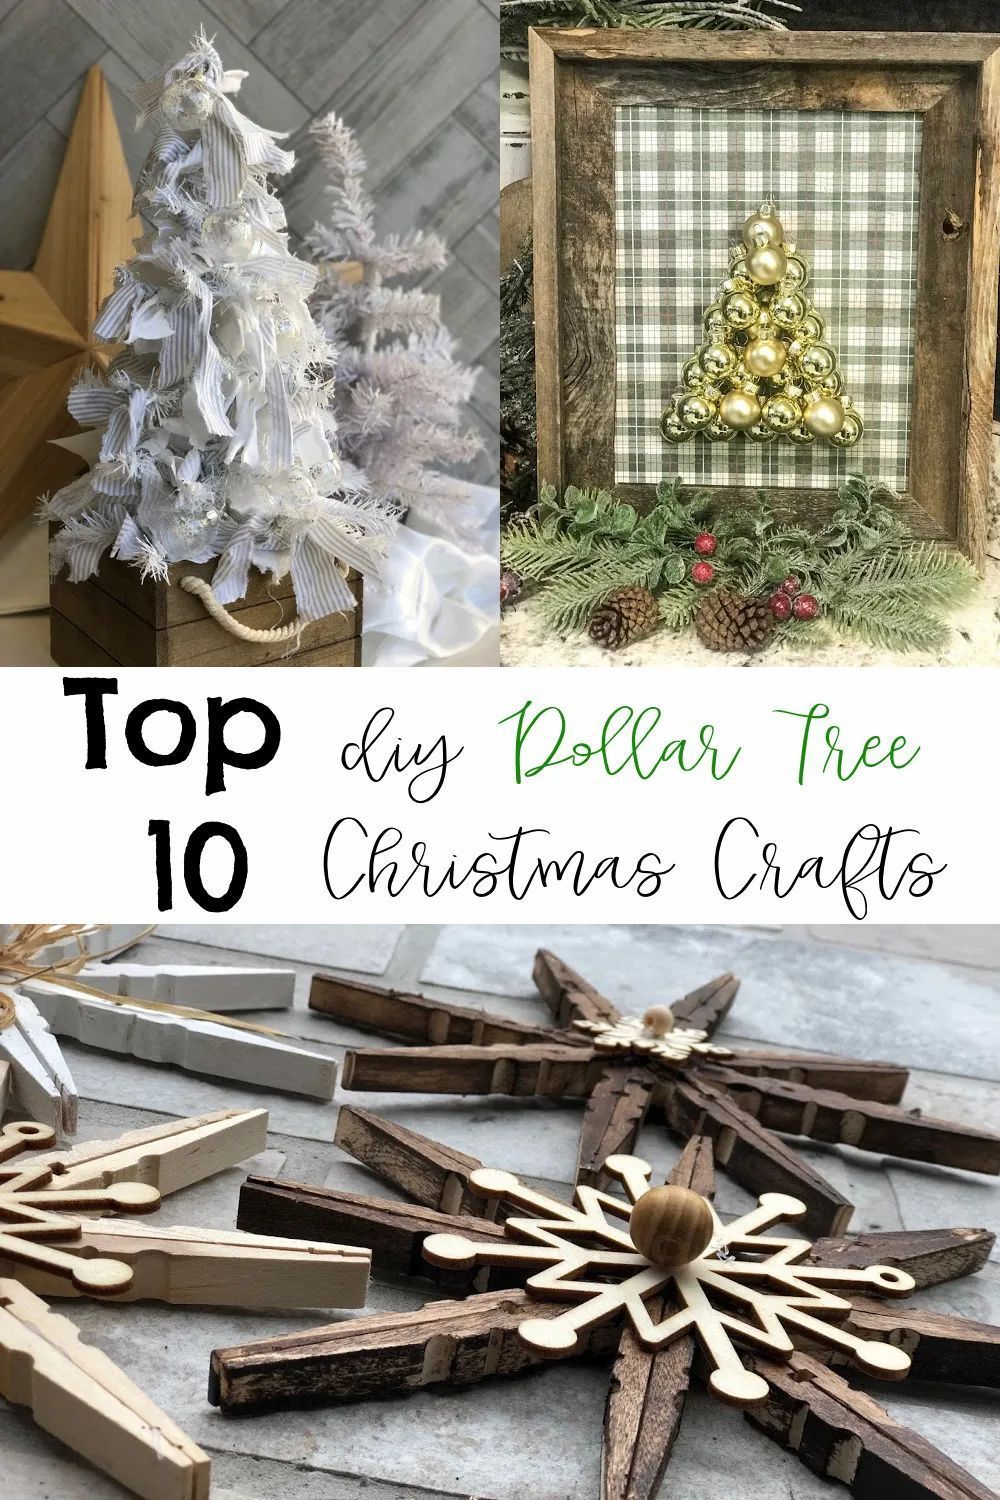 Top 10 Dollar Tree Christmas Projects - Re-Fabbed -   24 diy christmas decorations dollar tree 2020 ideas